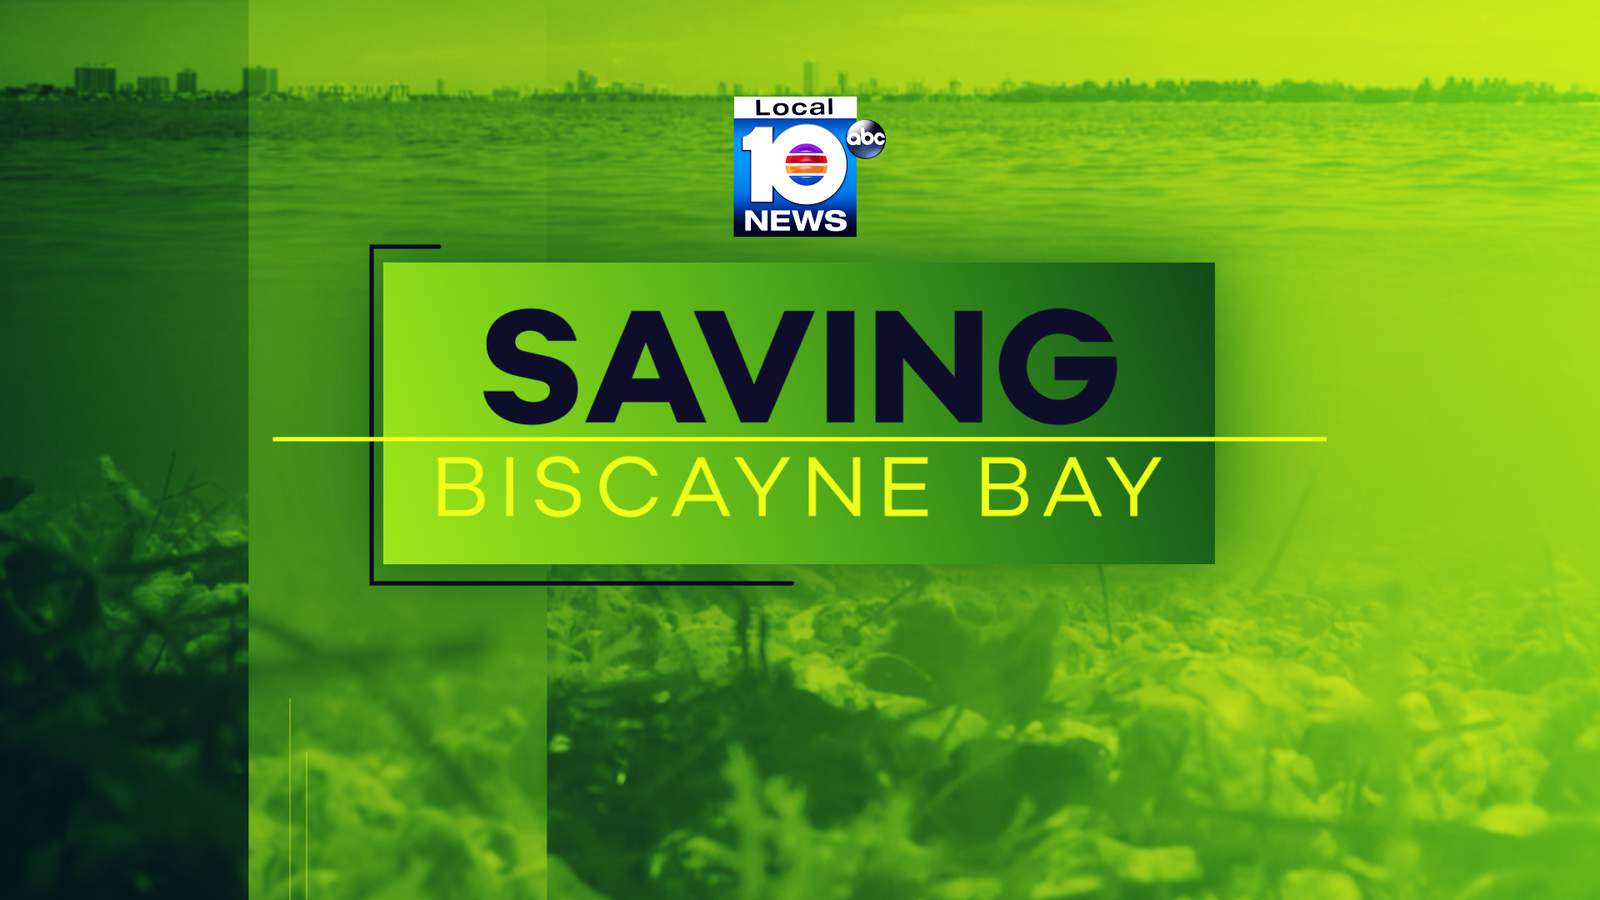 REPLAY: ’Saving Biscayne Bay’ special plus Q&A with Louis Aguirre and FIU experts